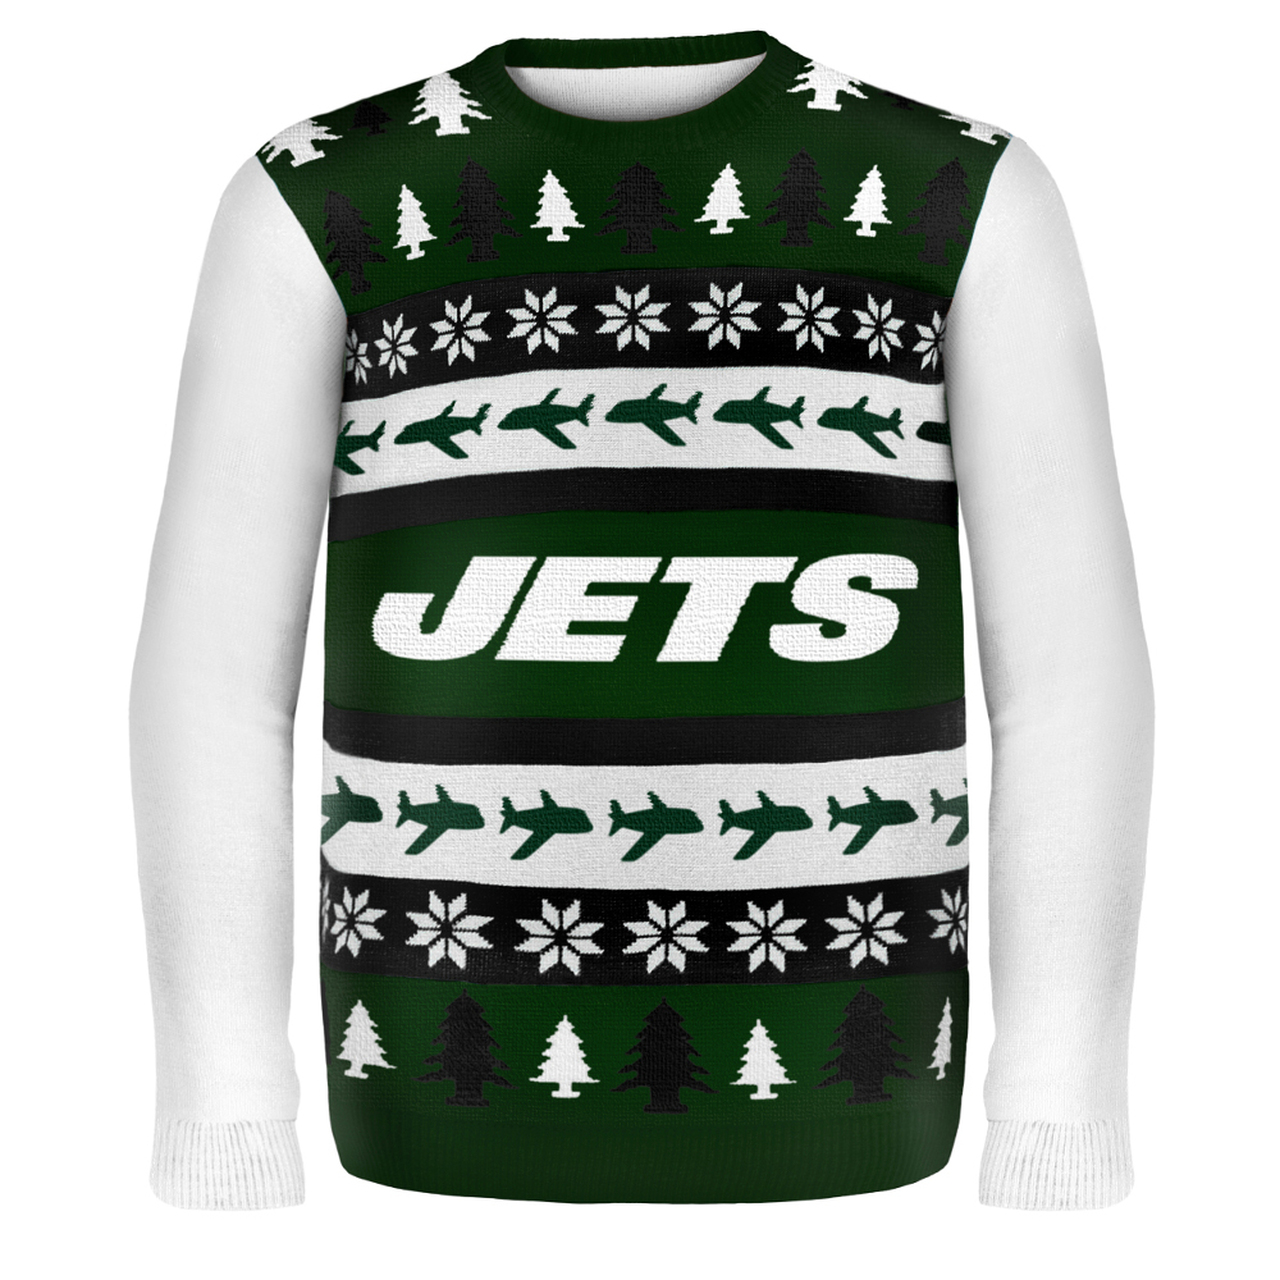 New York Jets NFL Ugly Sweater